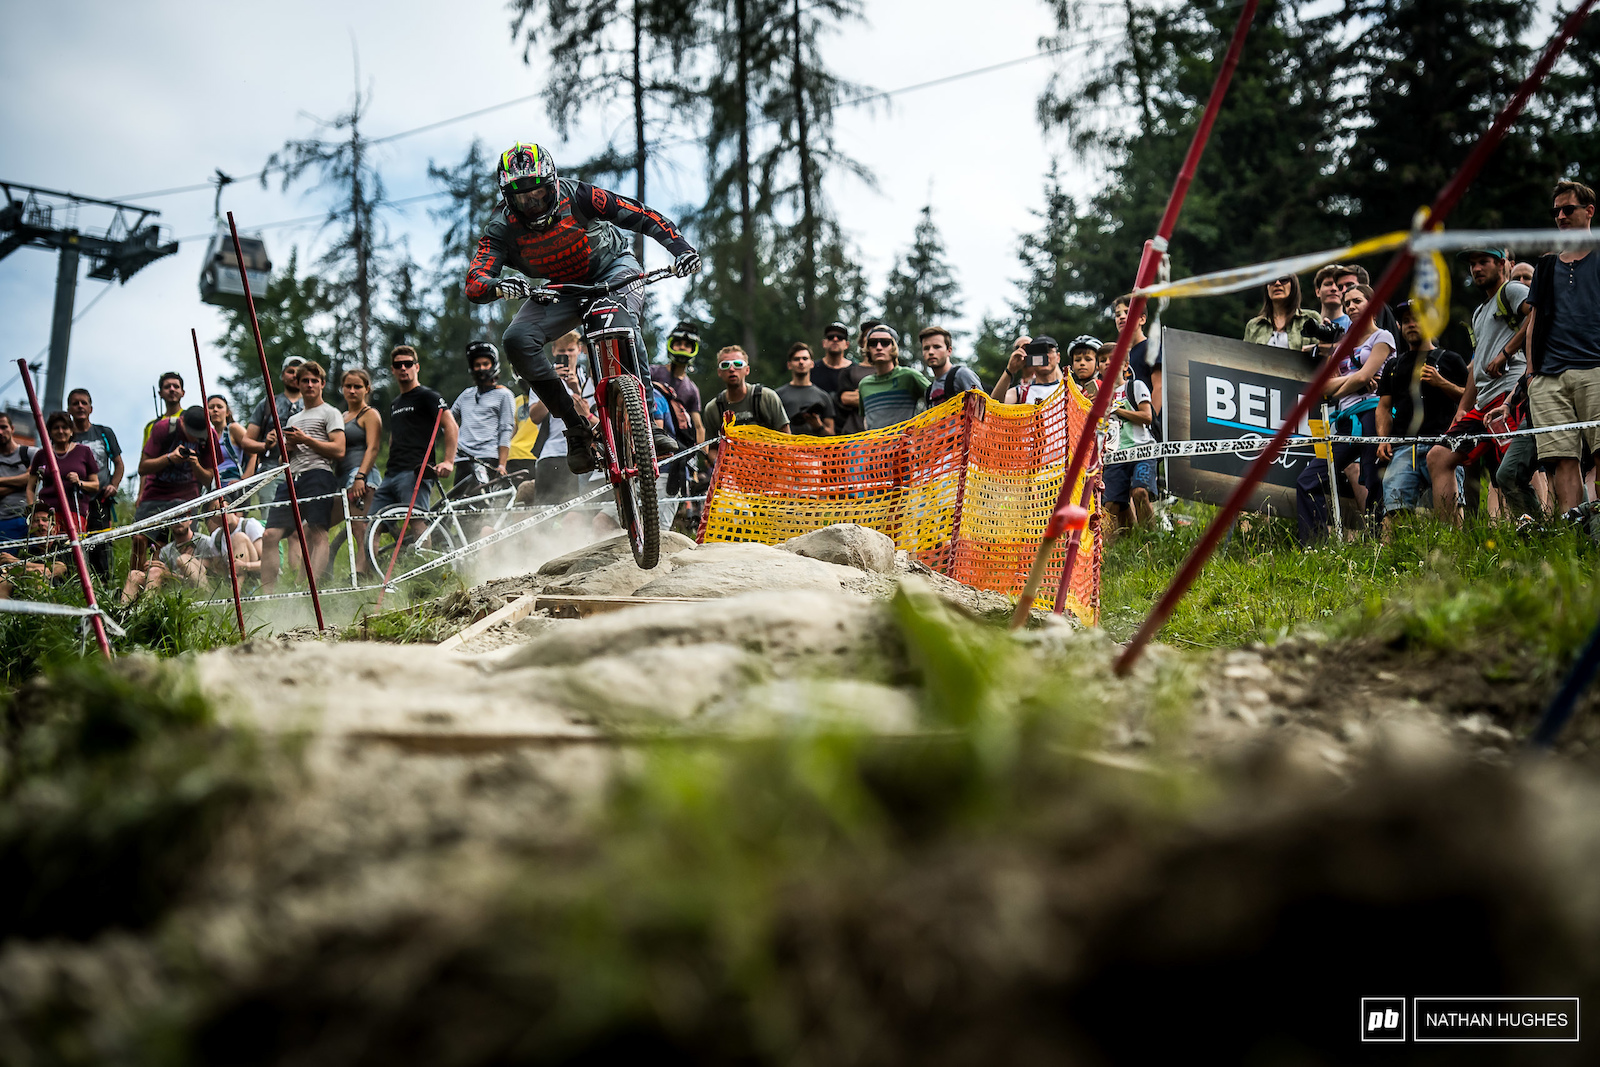 Charlie Harrison on the run of his career so far... 3rd place and his first Crankworx podium.